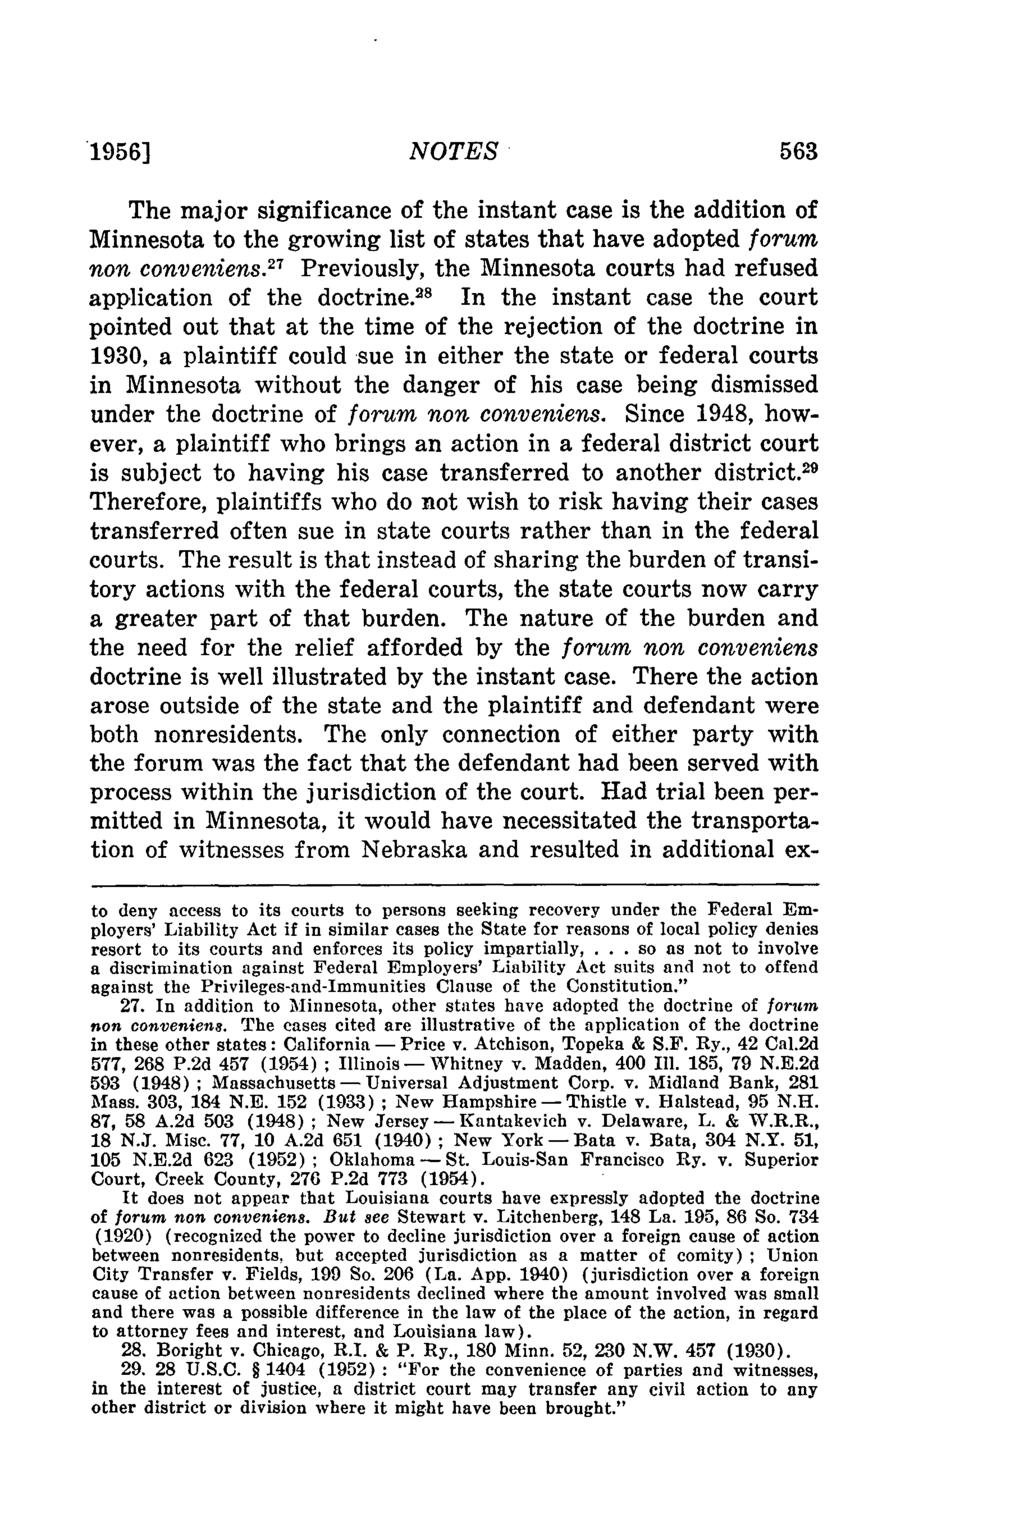 1956] NOTES The major significance of the instant case is the addition of Minnesota to the growing list of states that have adopted forum non conveniens.